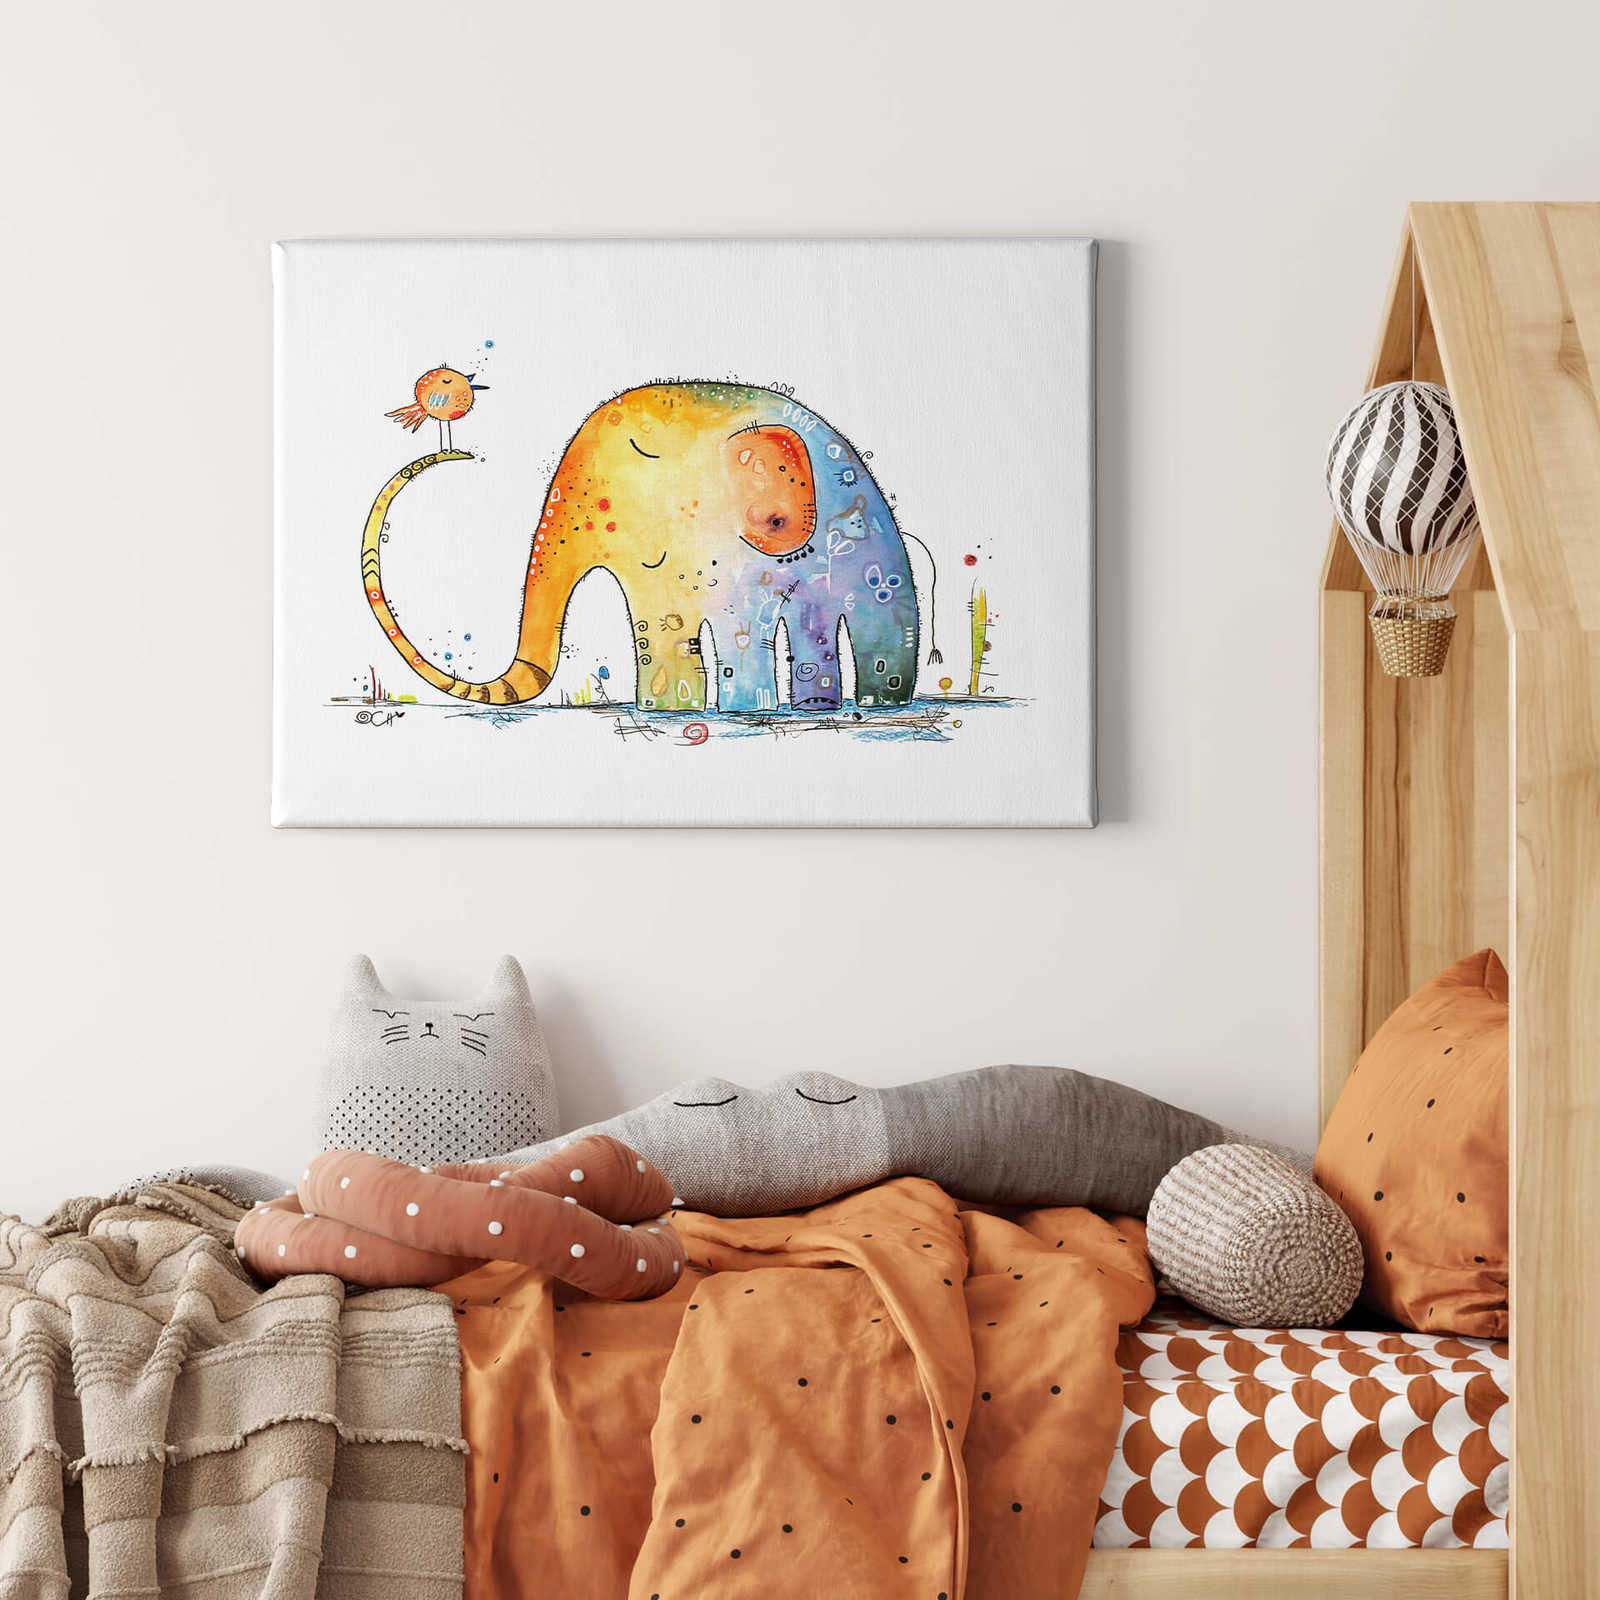             Canvas print children, elephant and bird by Hagenmeyer
        